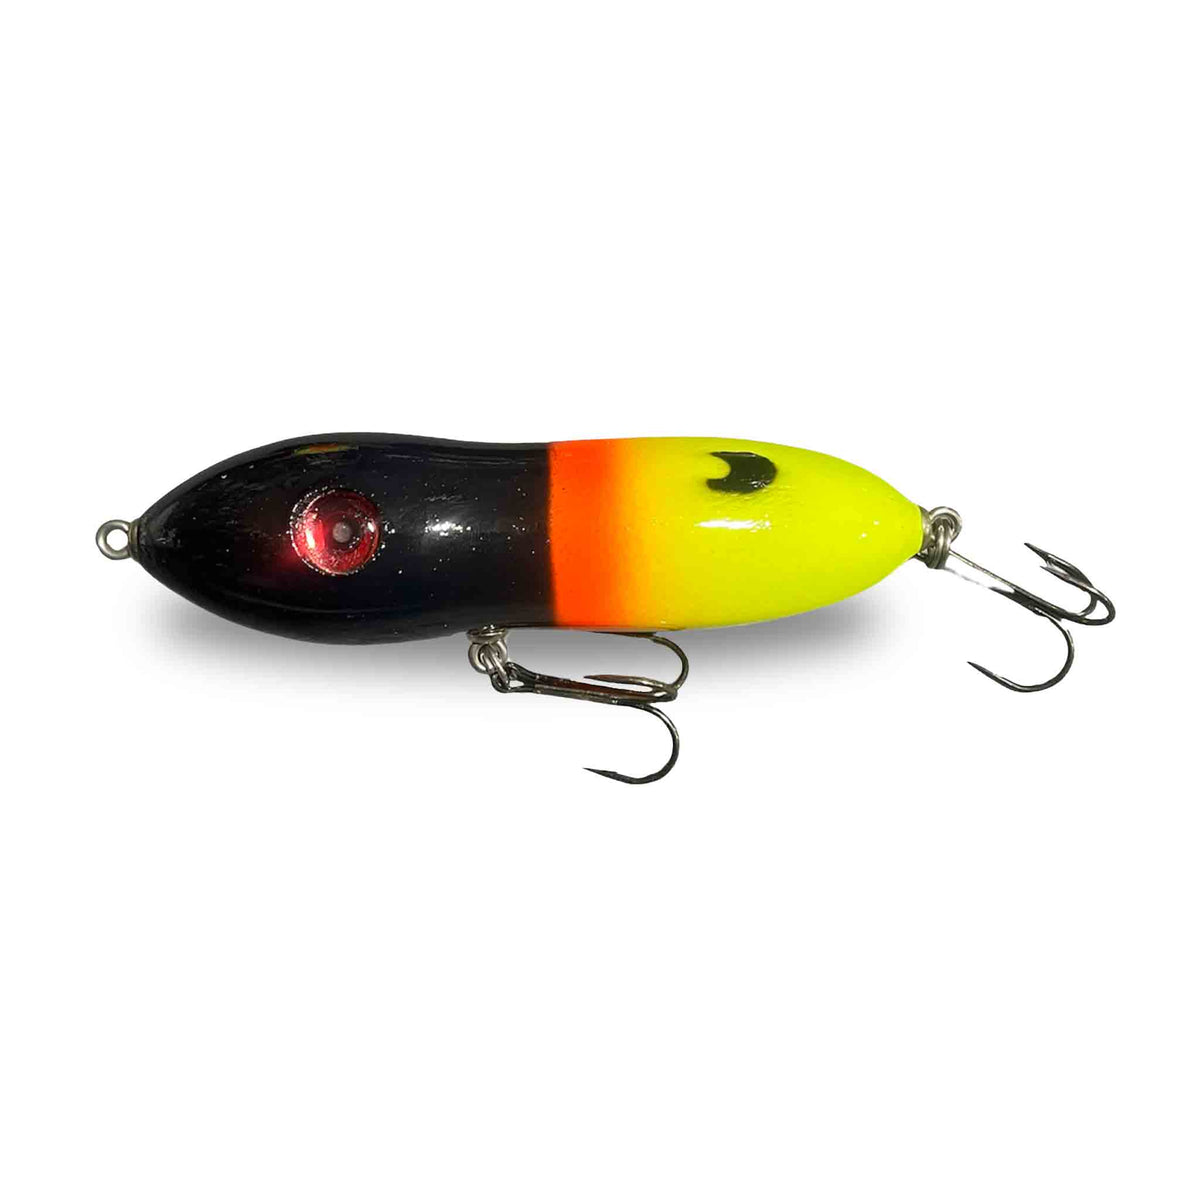 View of Topwater Big Mama Bubba Topwater Bait Fire Tail available at EZOKO Pike and Musky Shop